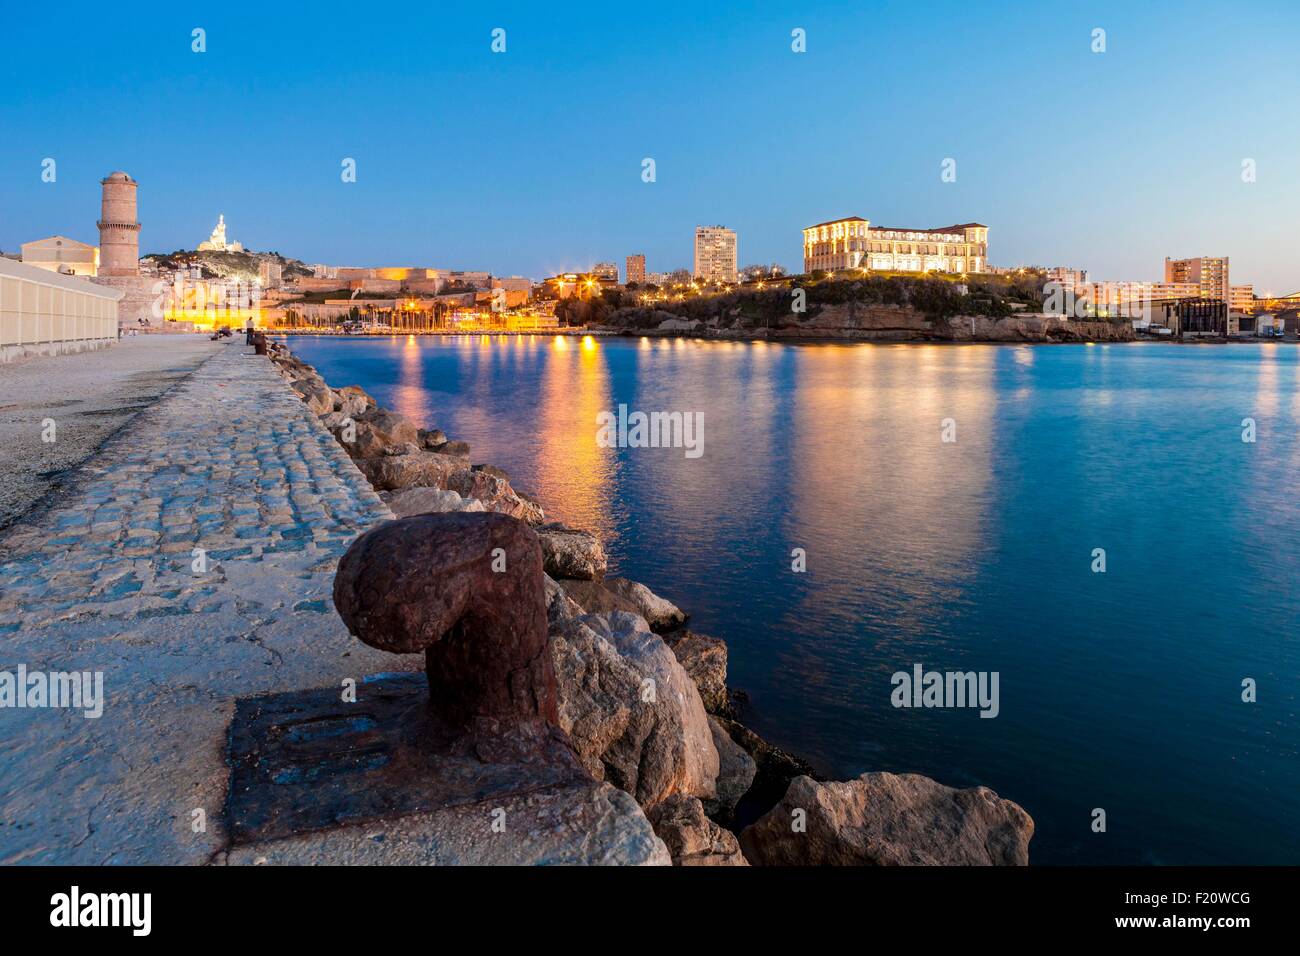 France, Bouches du Rhone, Marseille, the entrance to the Old Port and the Pharo Palace Stock Photo